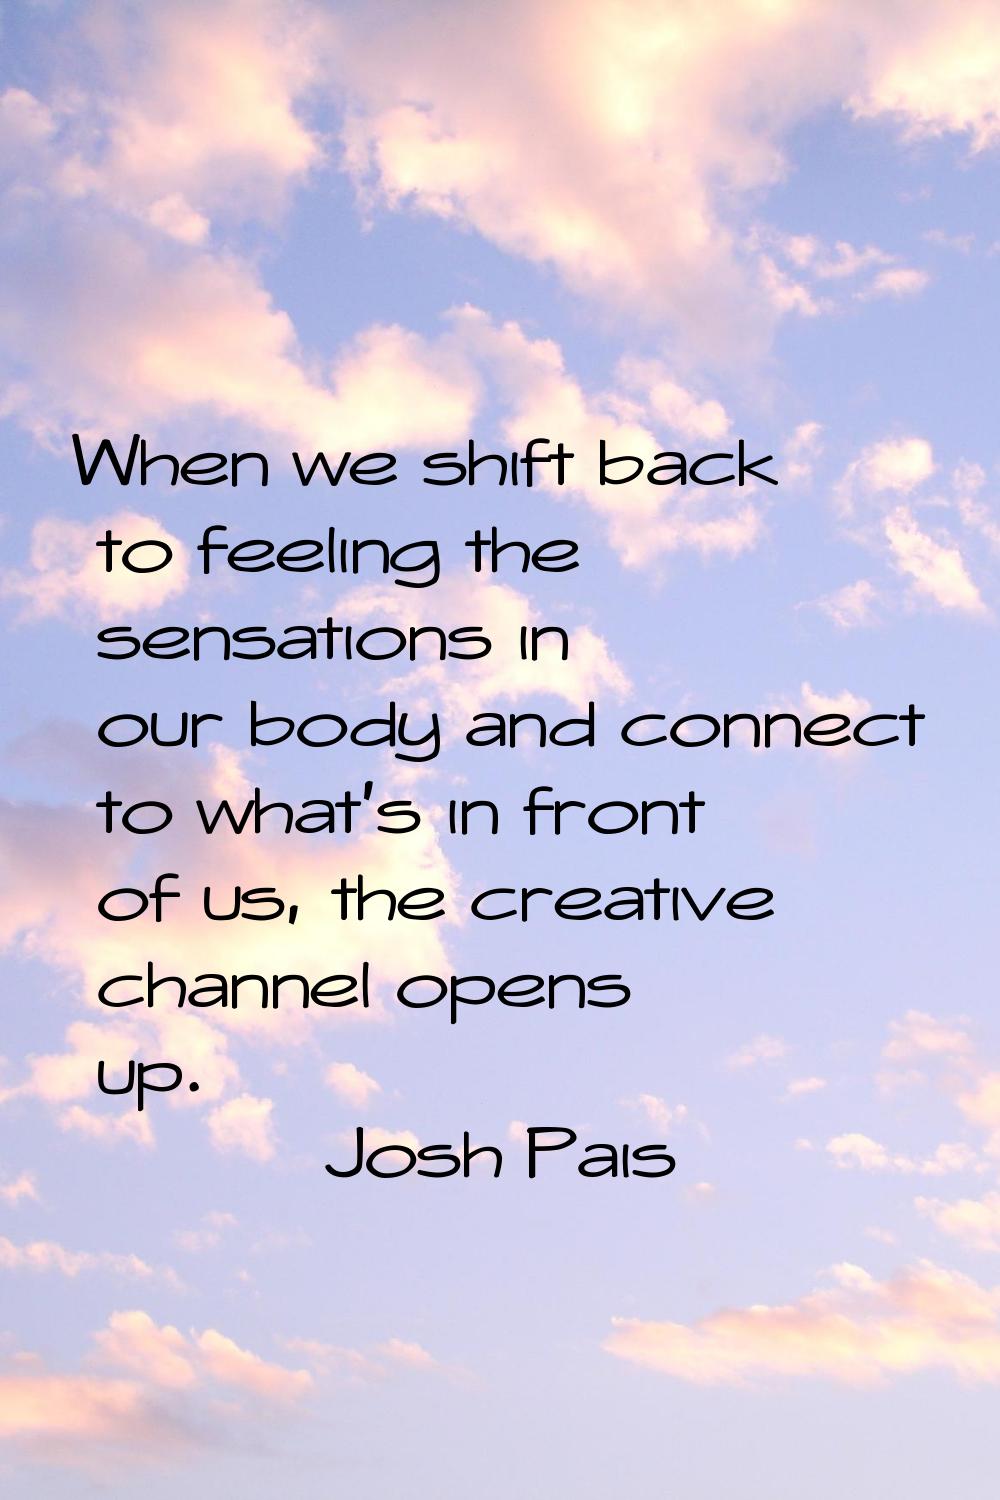 When we shift back to feeling the sensations in our body and connect to what's in front of us, the 